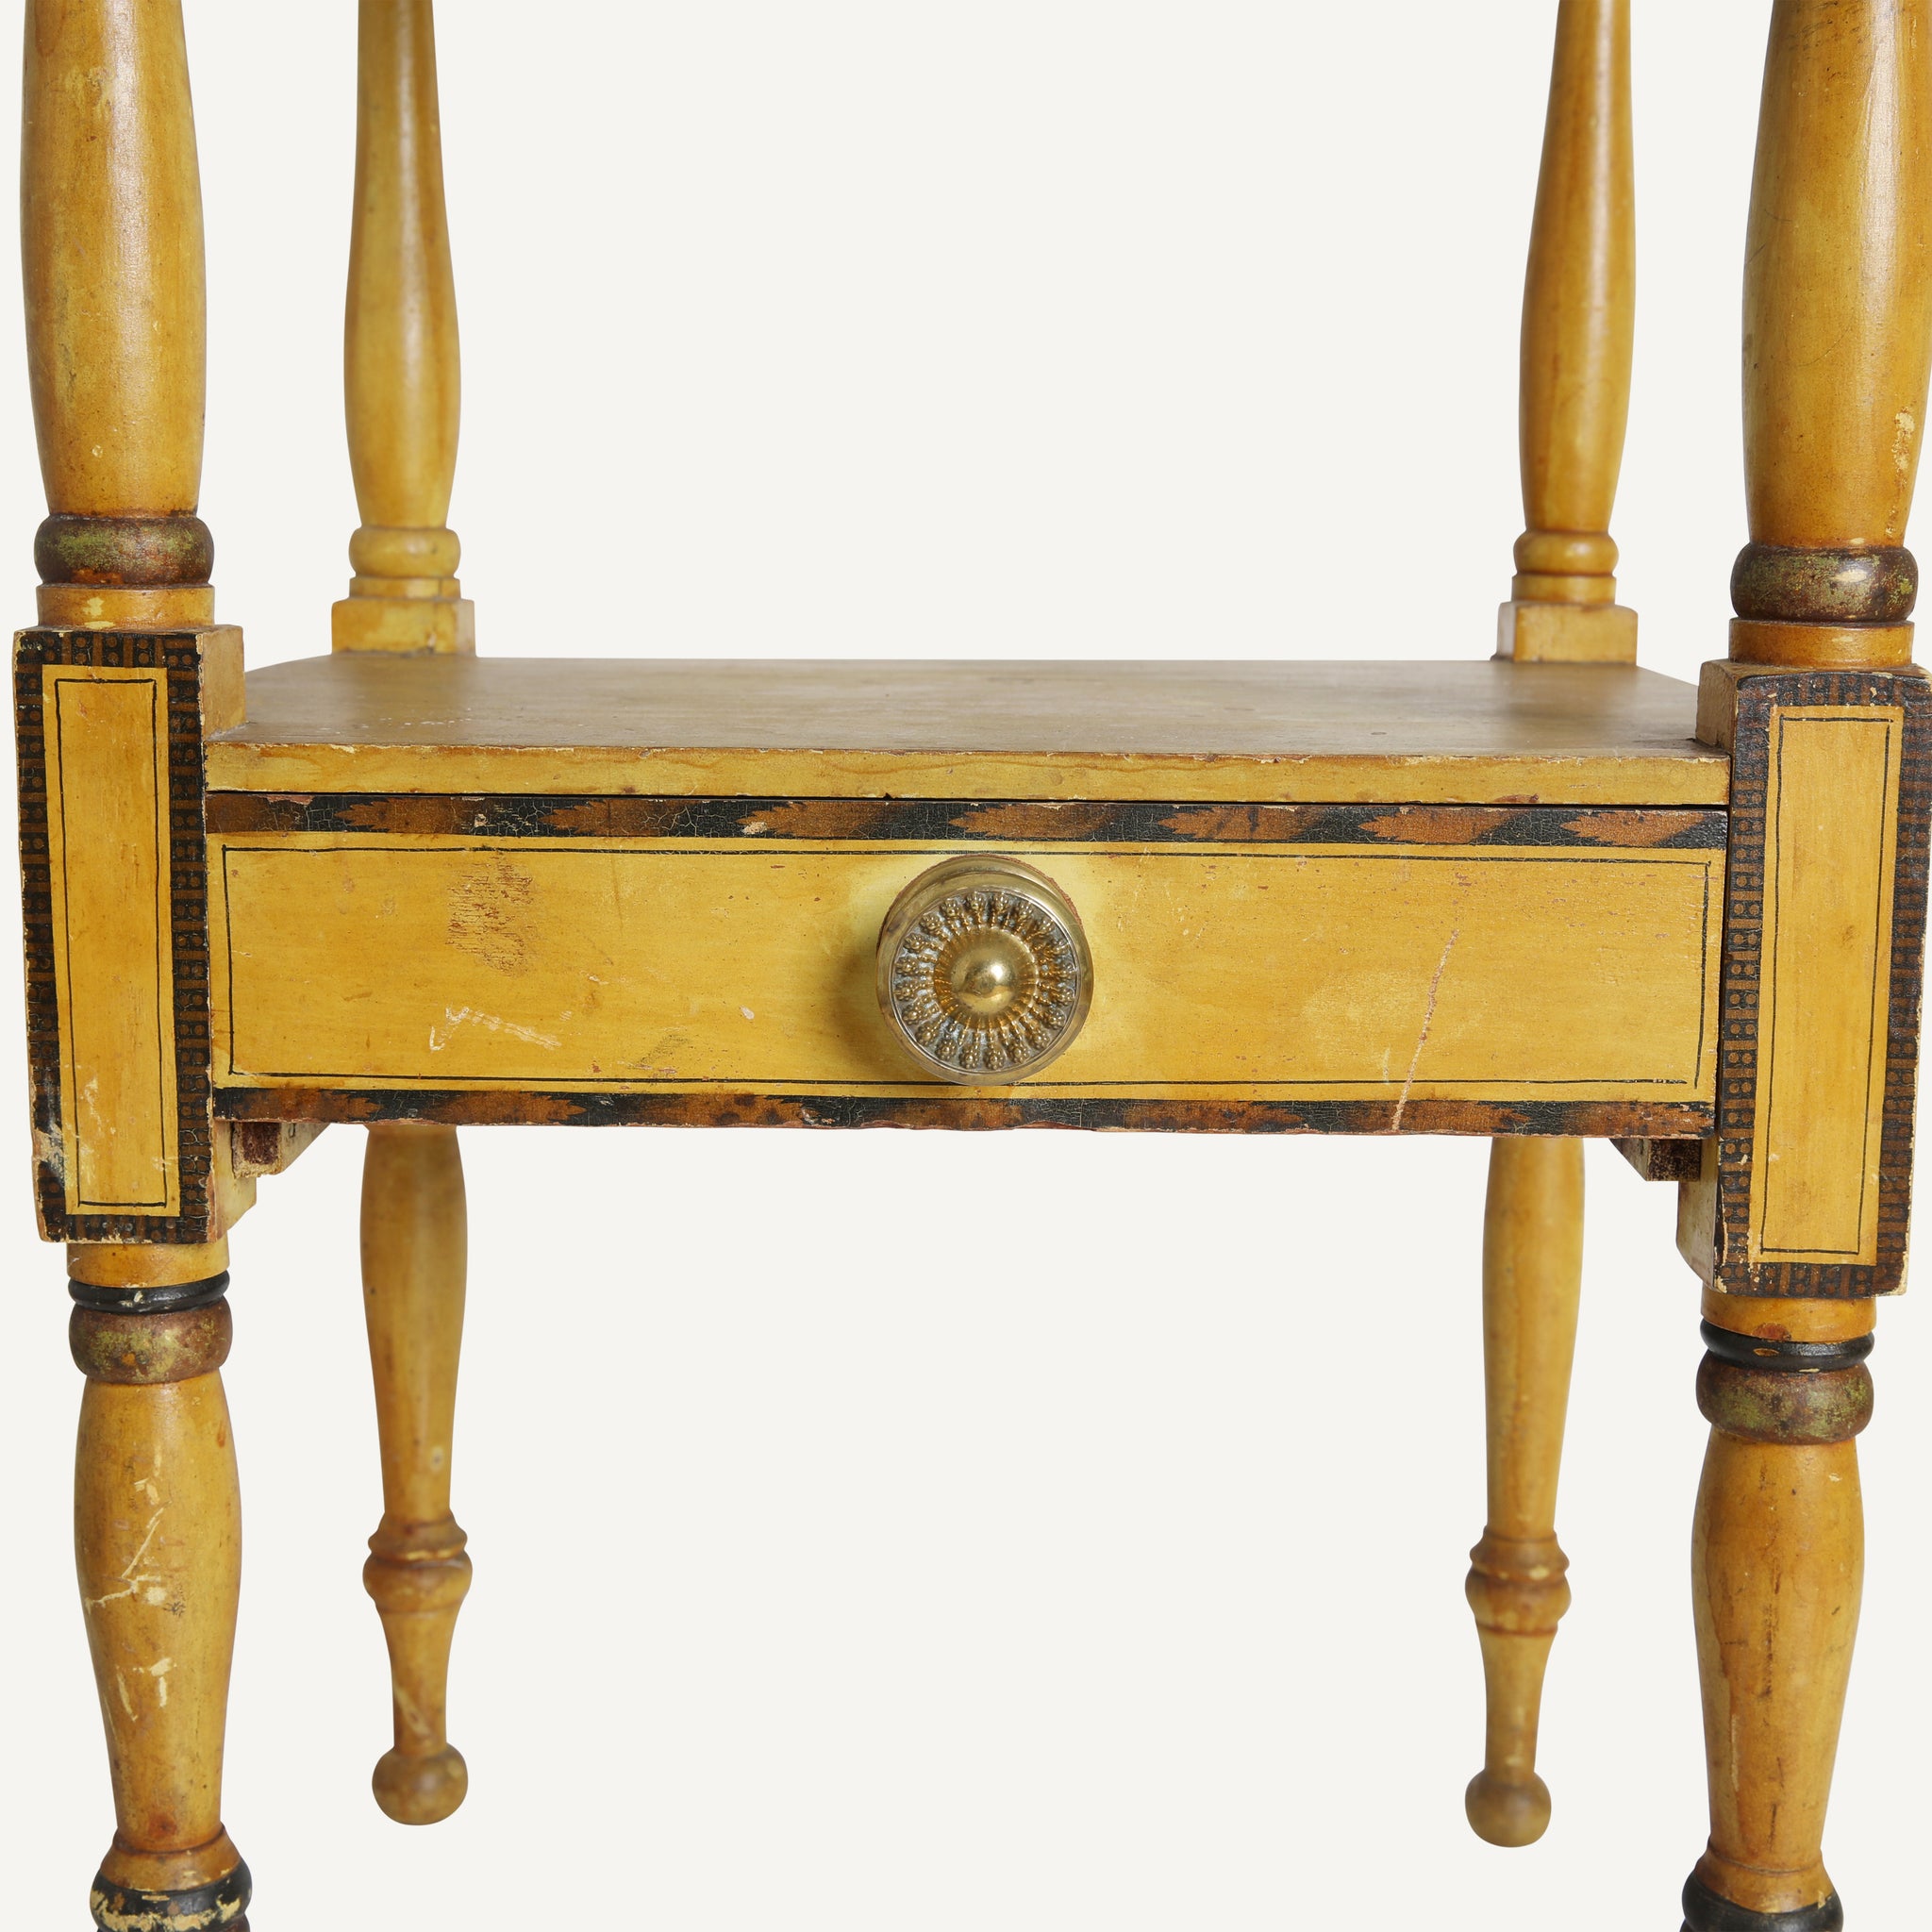 ANTIQUE PAINTED SHERATON GRAPEVINE WASHSTAND